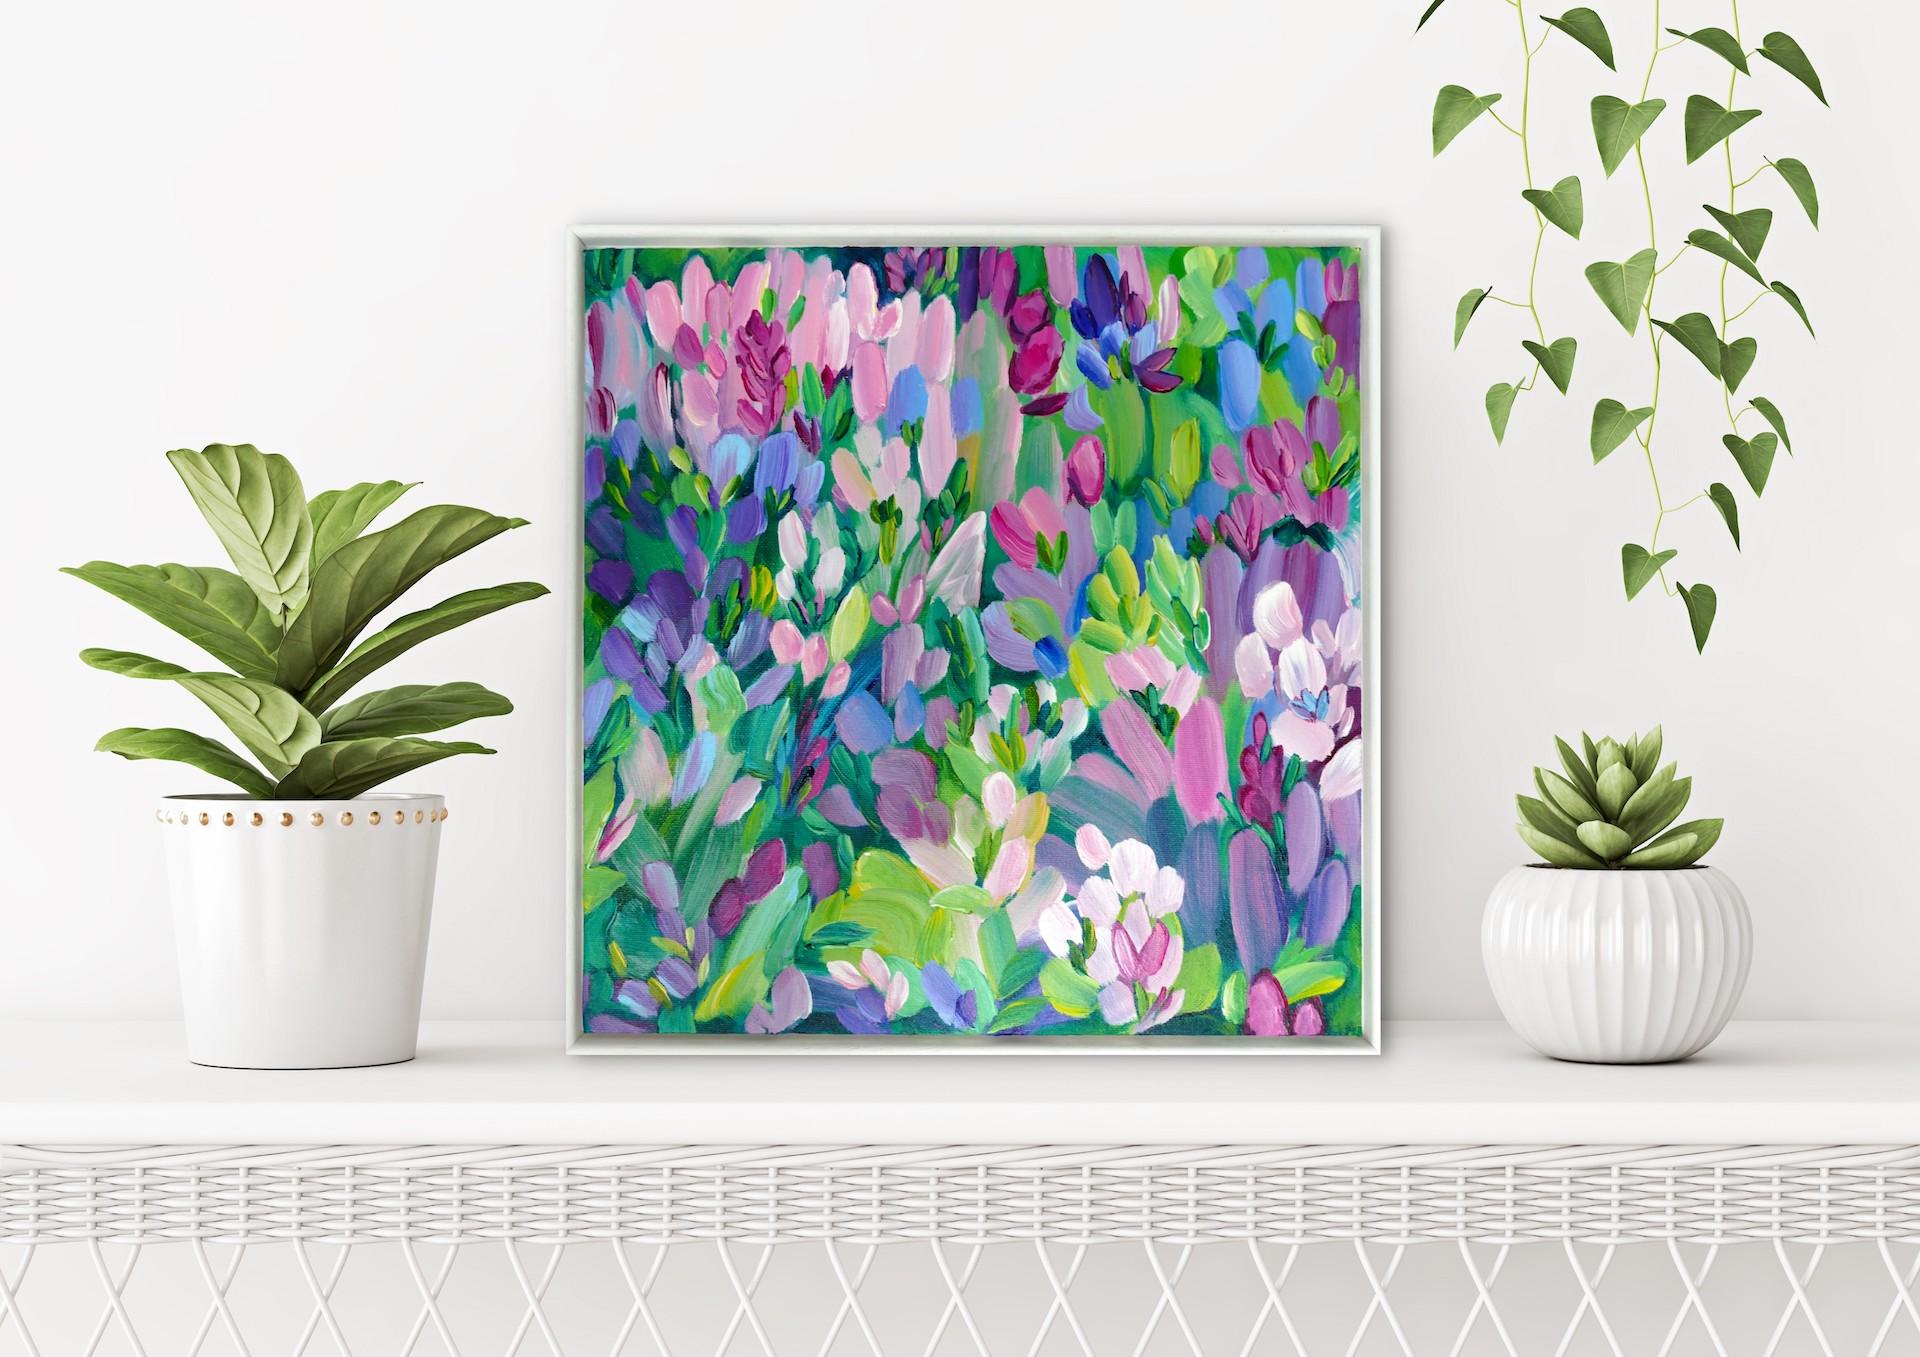 Alanna Eakin, Wildflowers VII, Original Abstract Floral Painting, Affordable Art 5